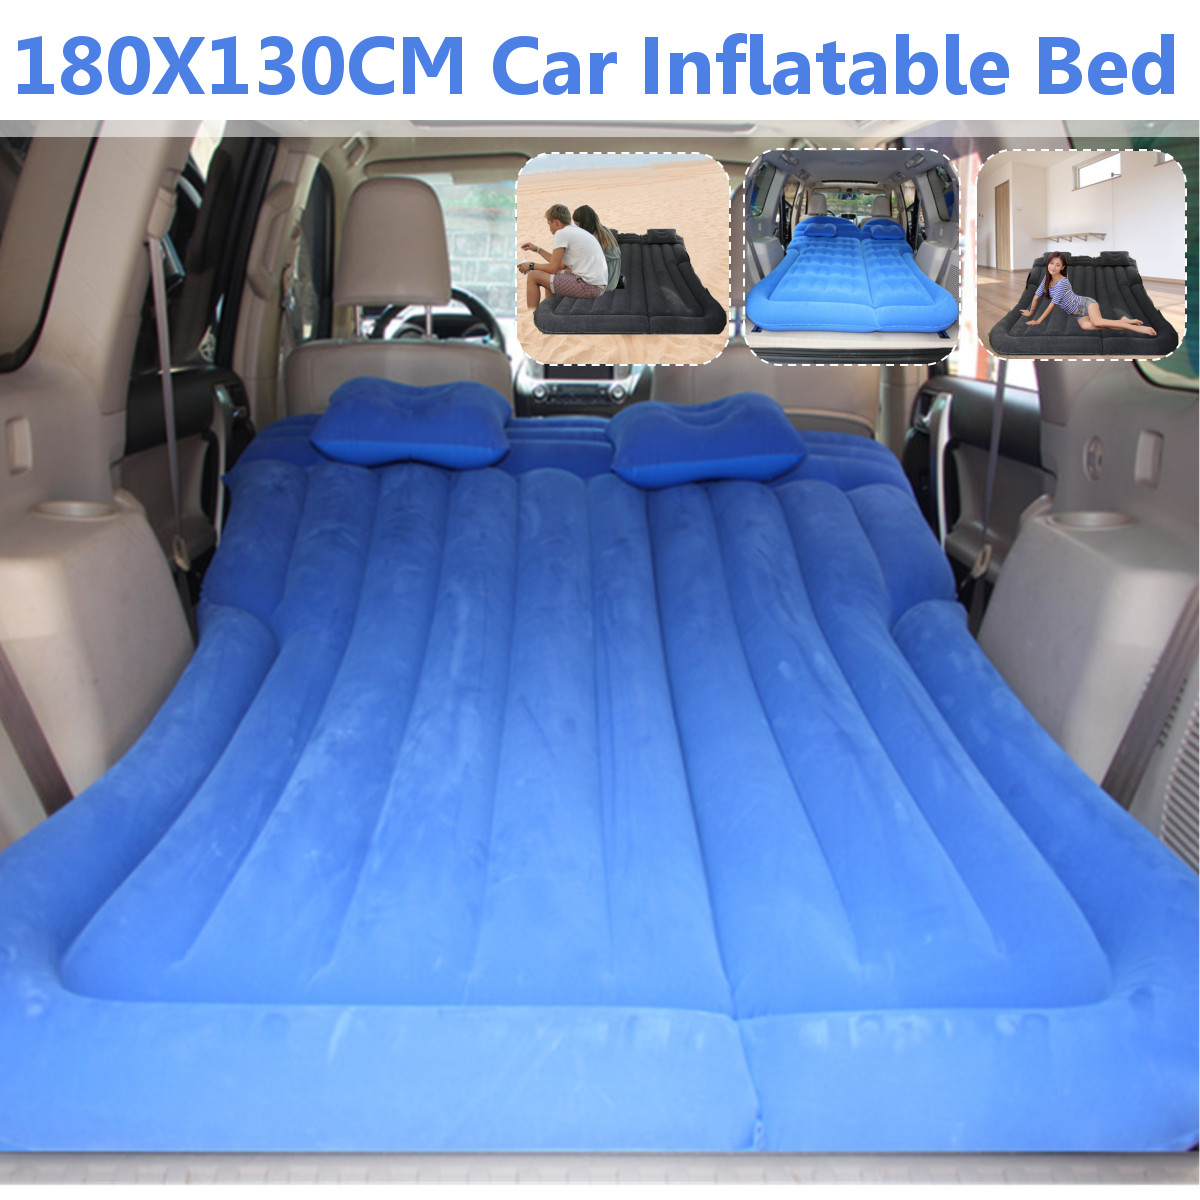 180x130cm-Multifunctional-Inflatable-Car-Air-Mattress-Durable-Back-Seat-Cover-Travel-Bed-Moisture-pr-1888970-2